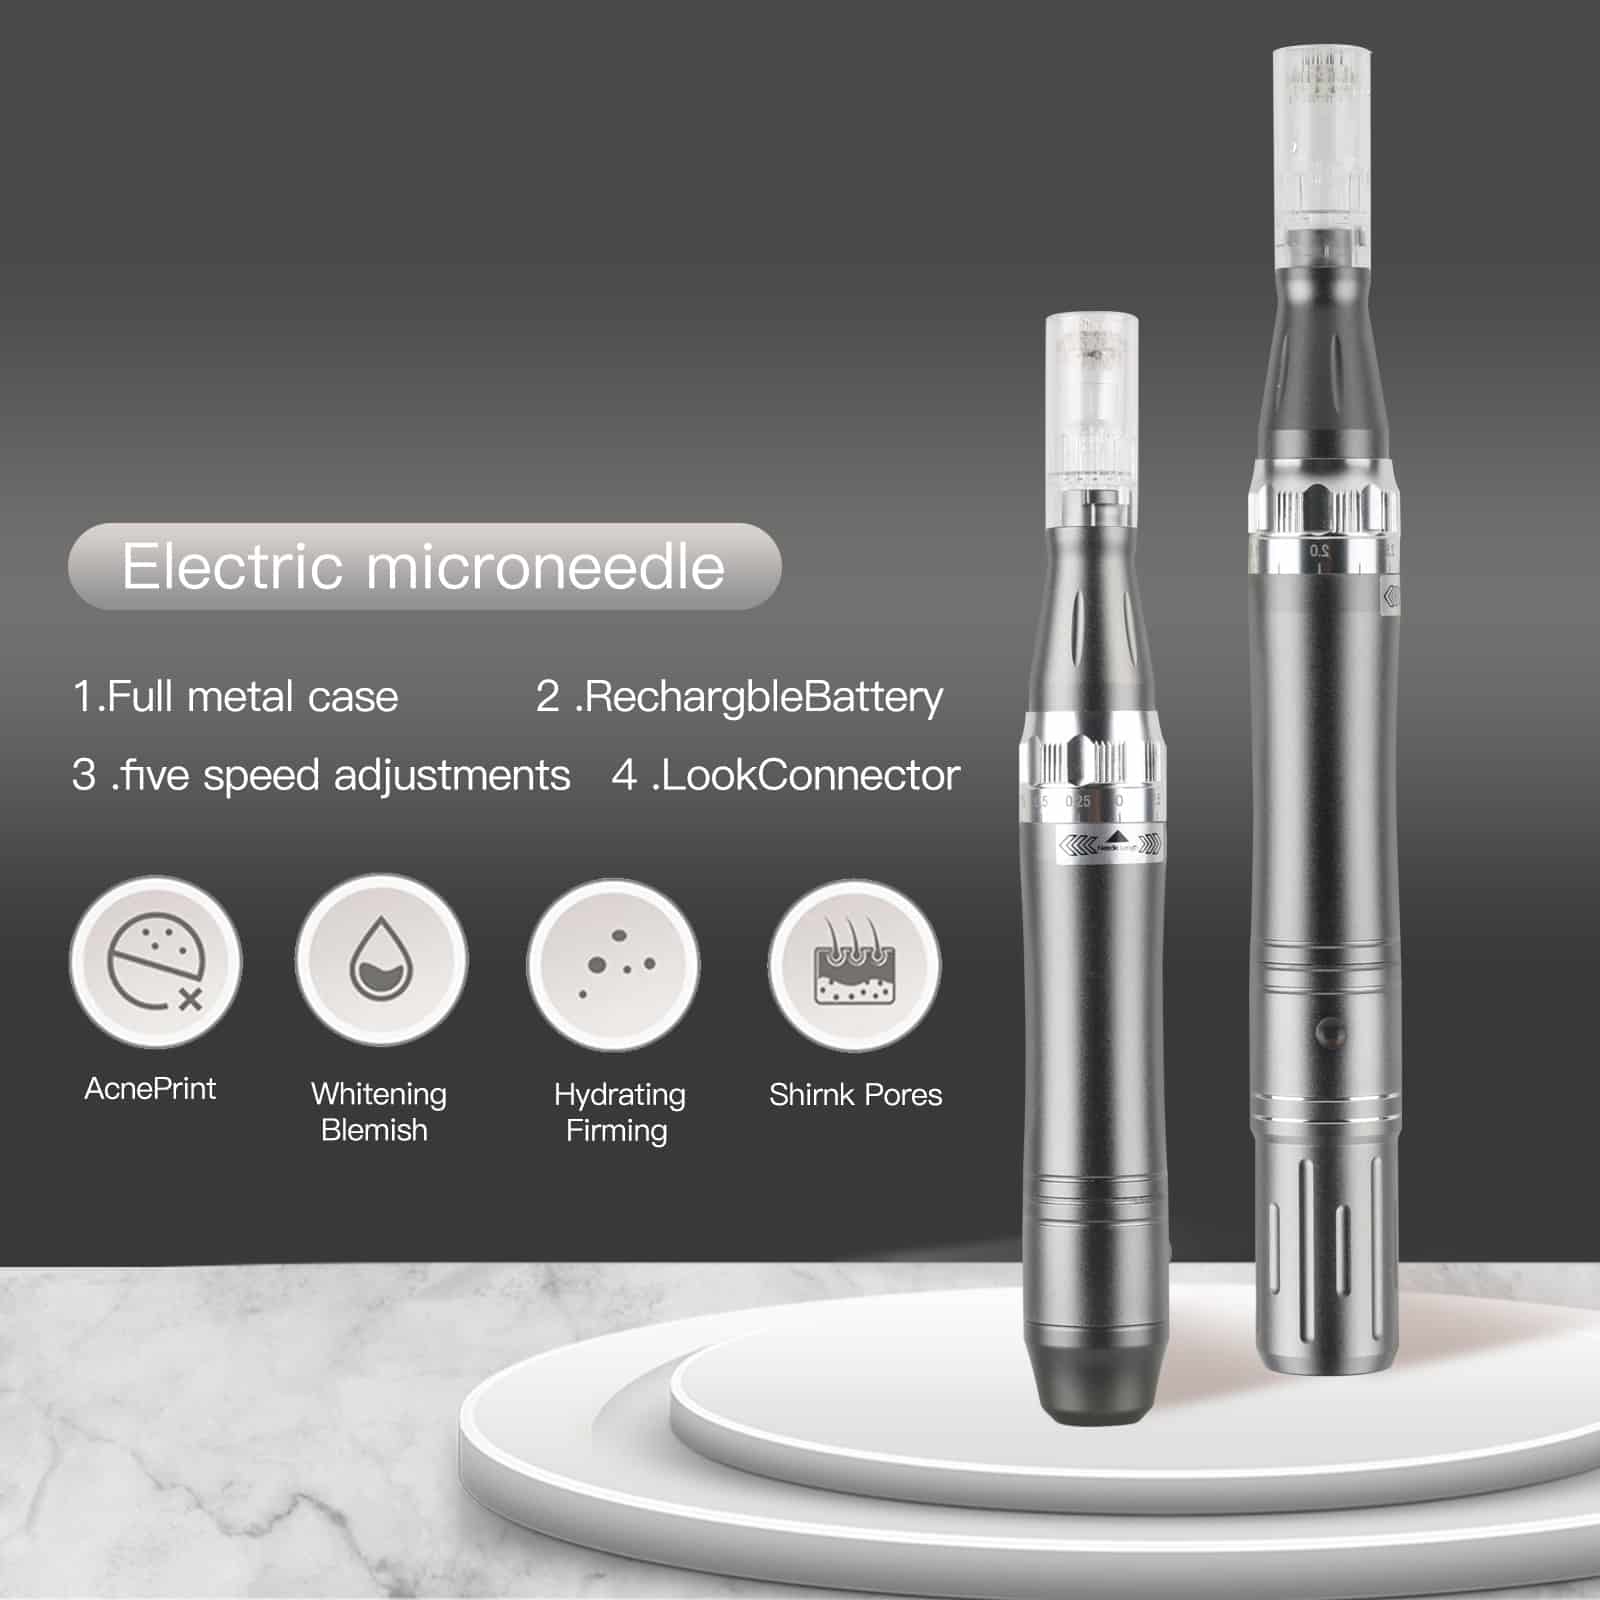 Professional LR-K6 Electric Derma Roller Microneedle Therapy Facial Beauty Skin Care Firming Machine Microneeding Pen插图